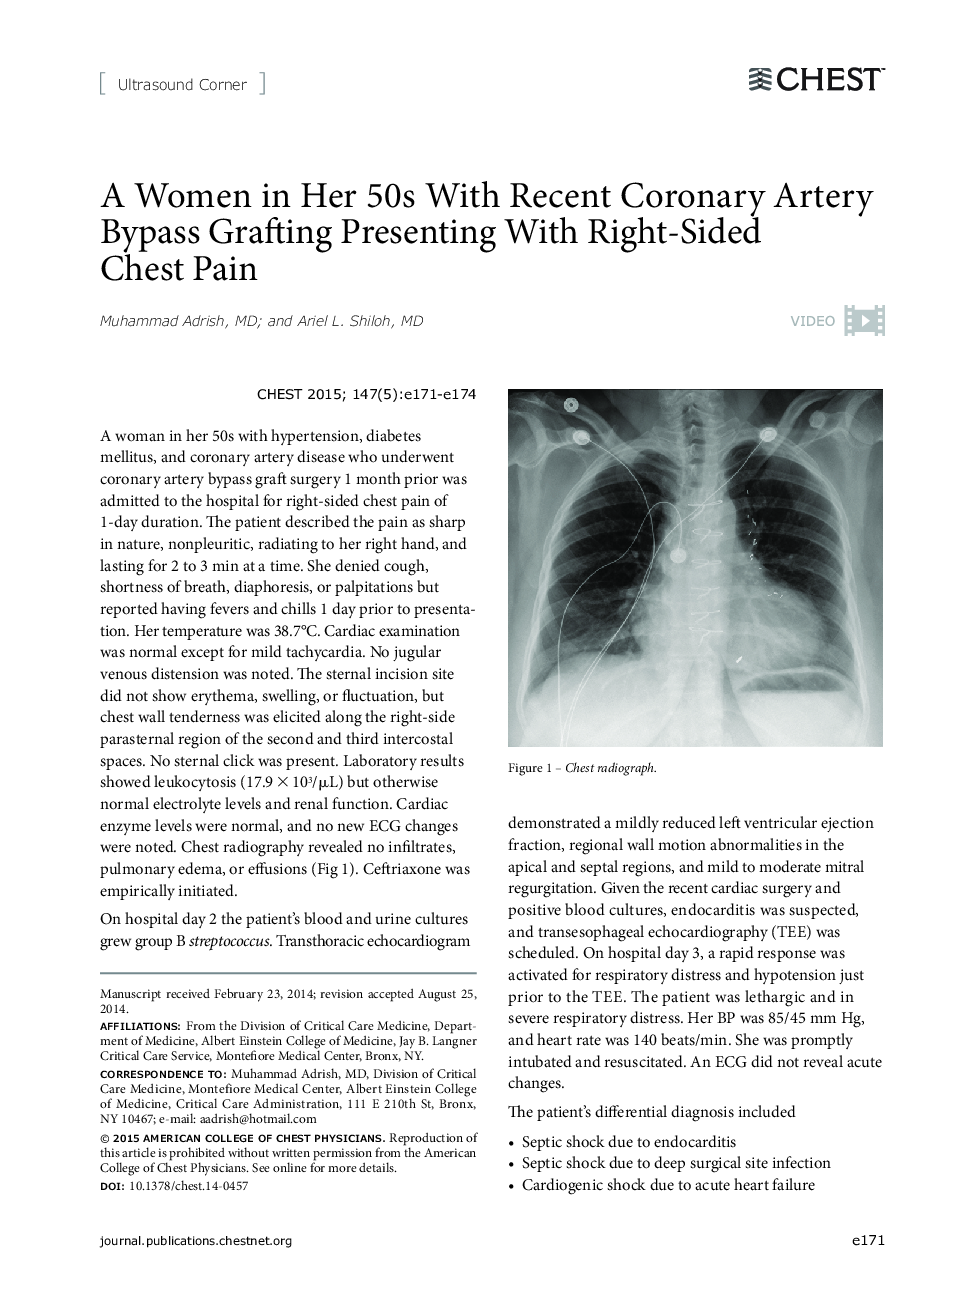 A Women in Her 50s With Recent Coronary Artery Bypass Grafting Presenting With Right-Sided Chest Pain